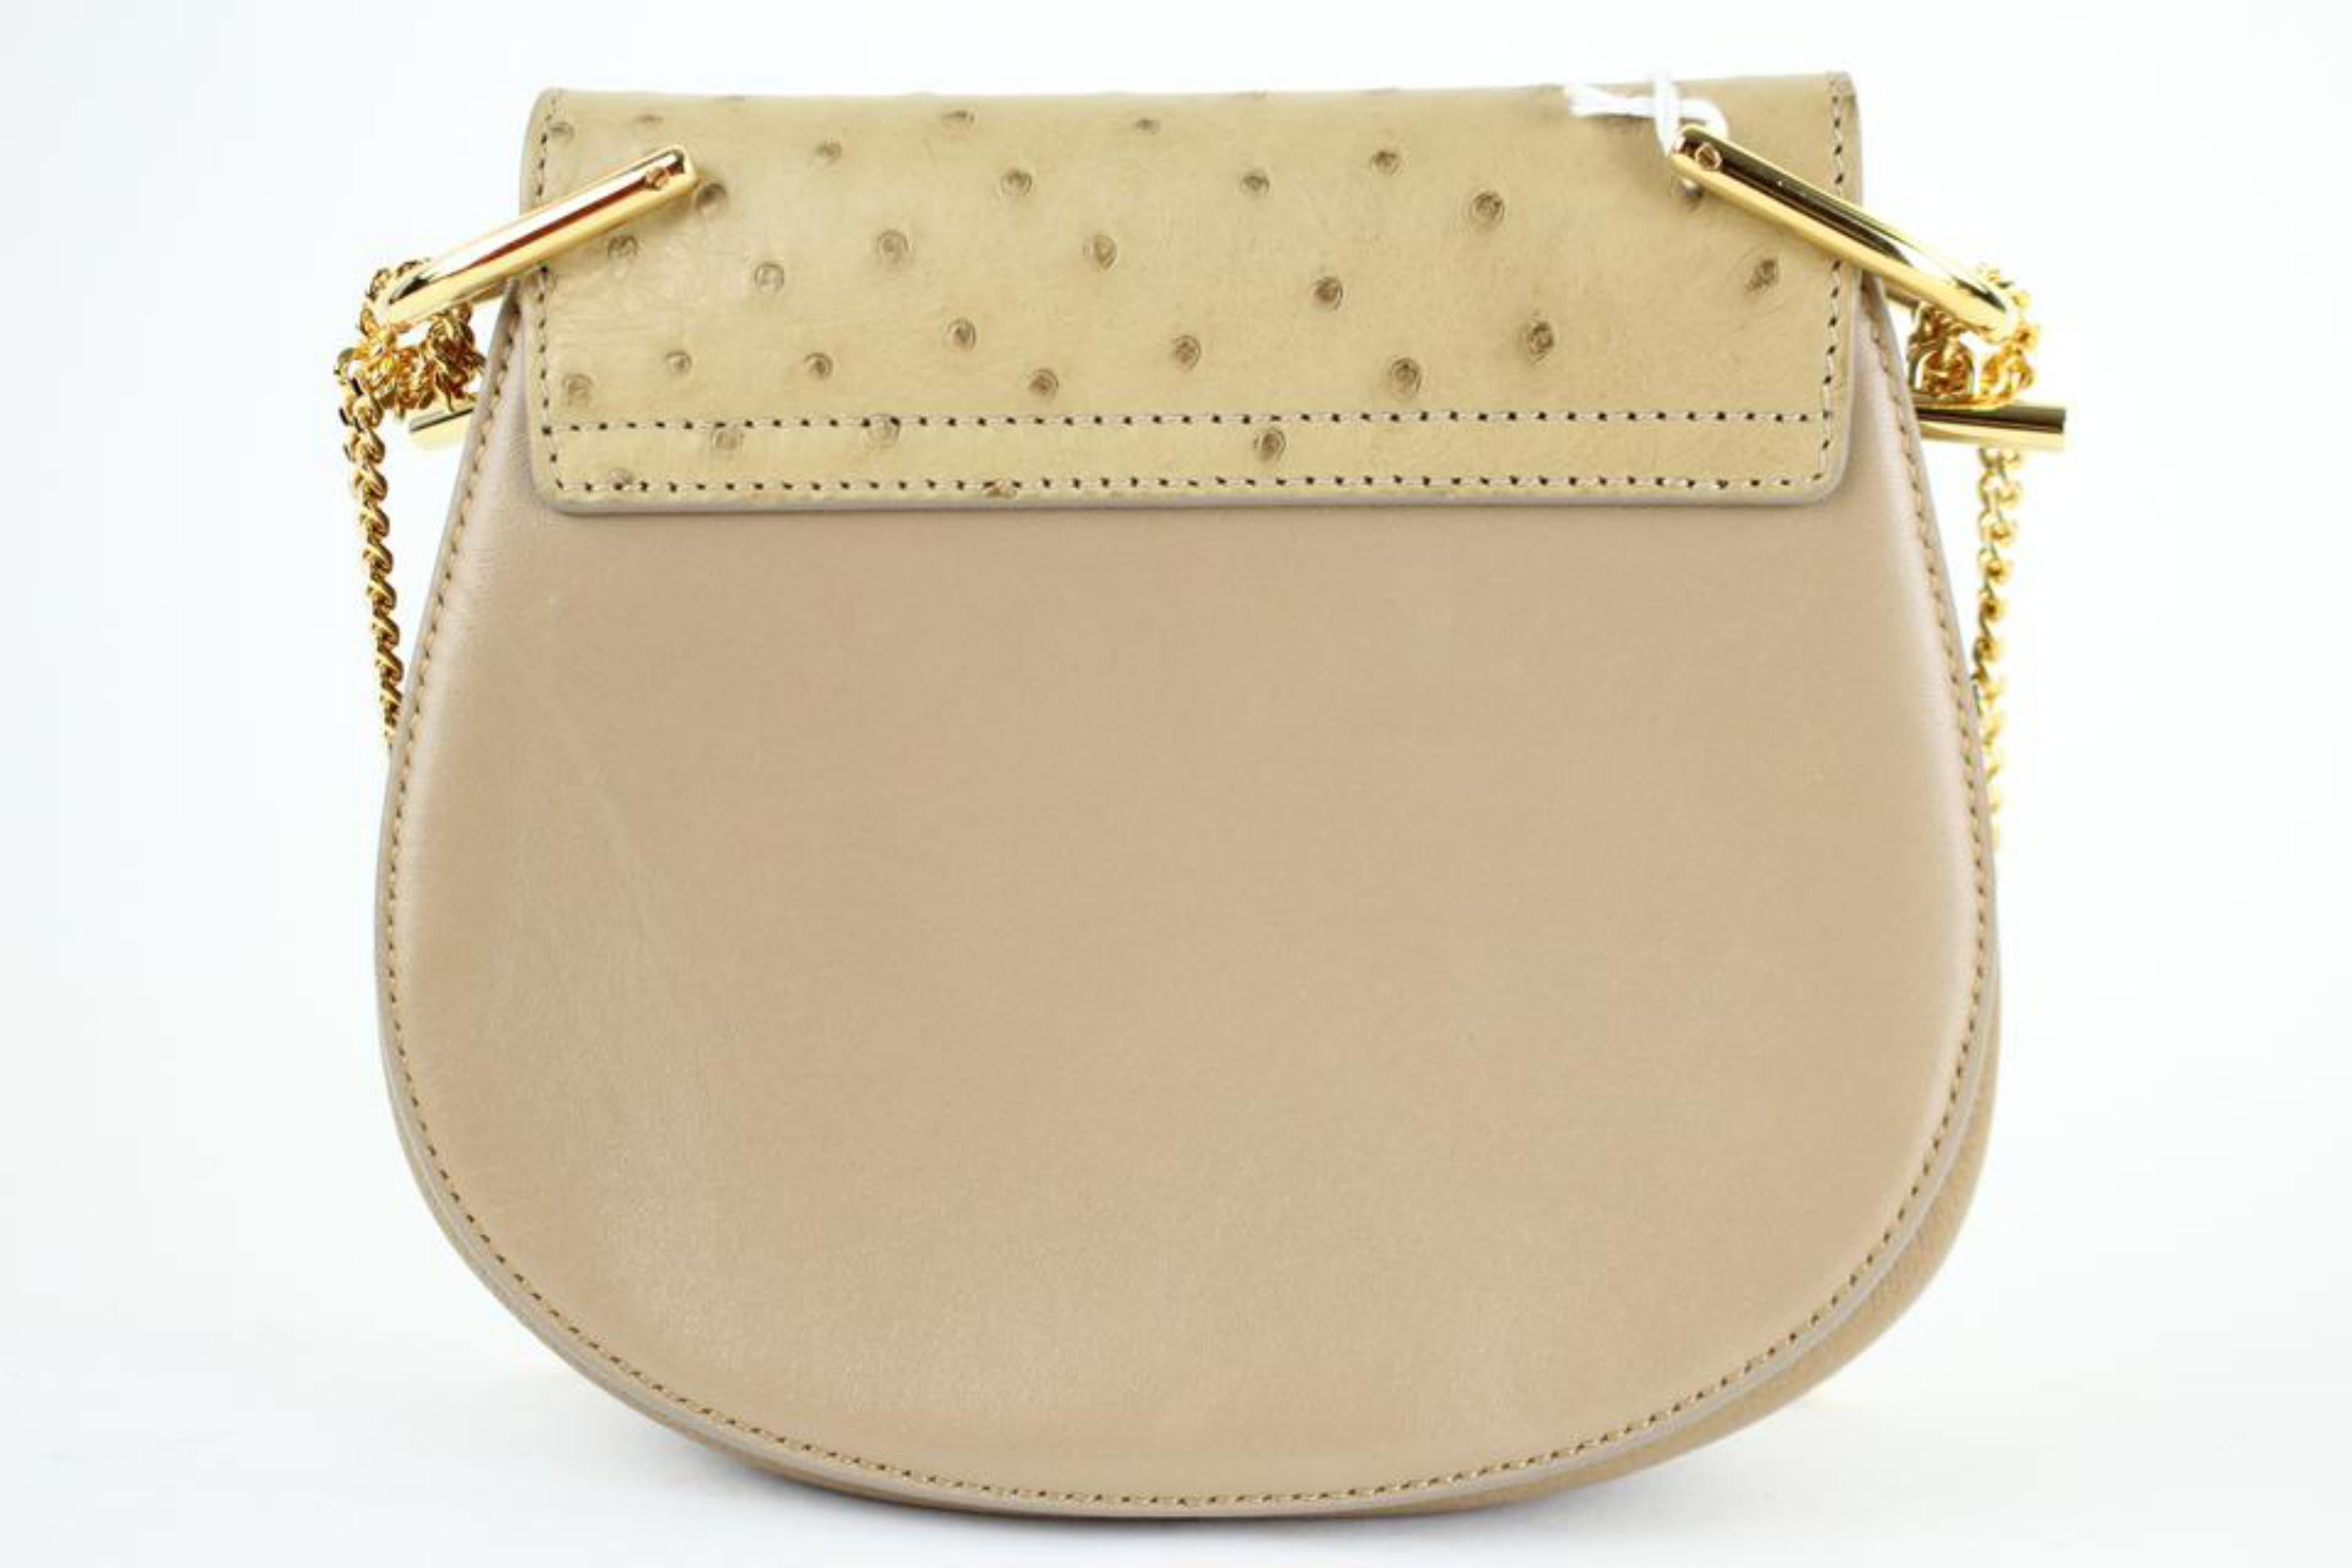 Chloé Drew Mini and Ostrich 825mt11 Beige Leather Cross Body Bag In New Condition For Sale In Forest Hills, NY